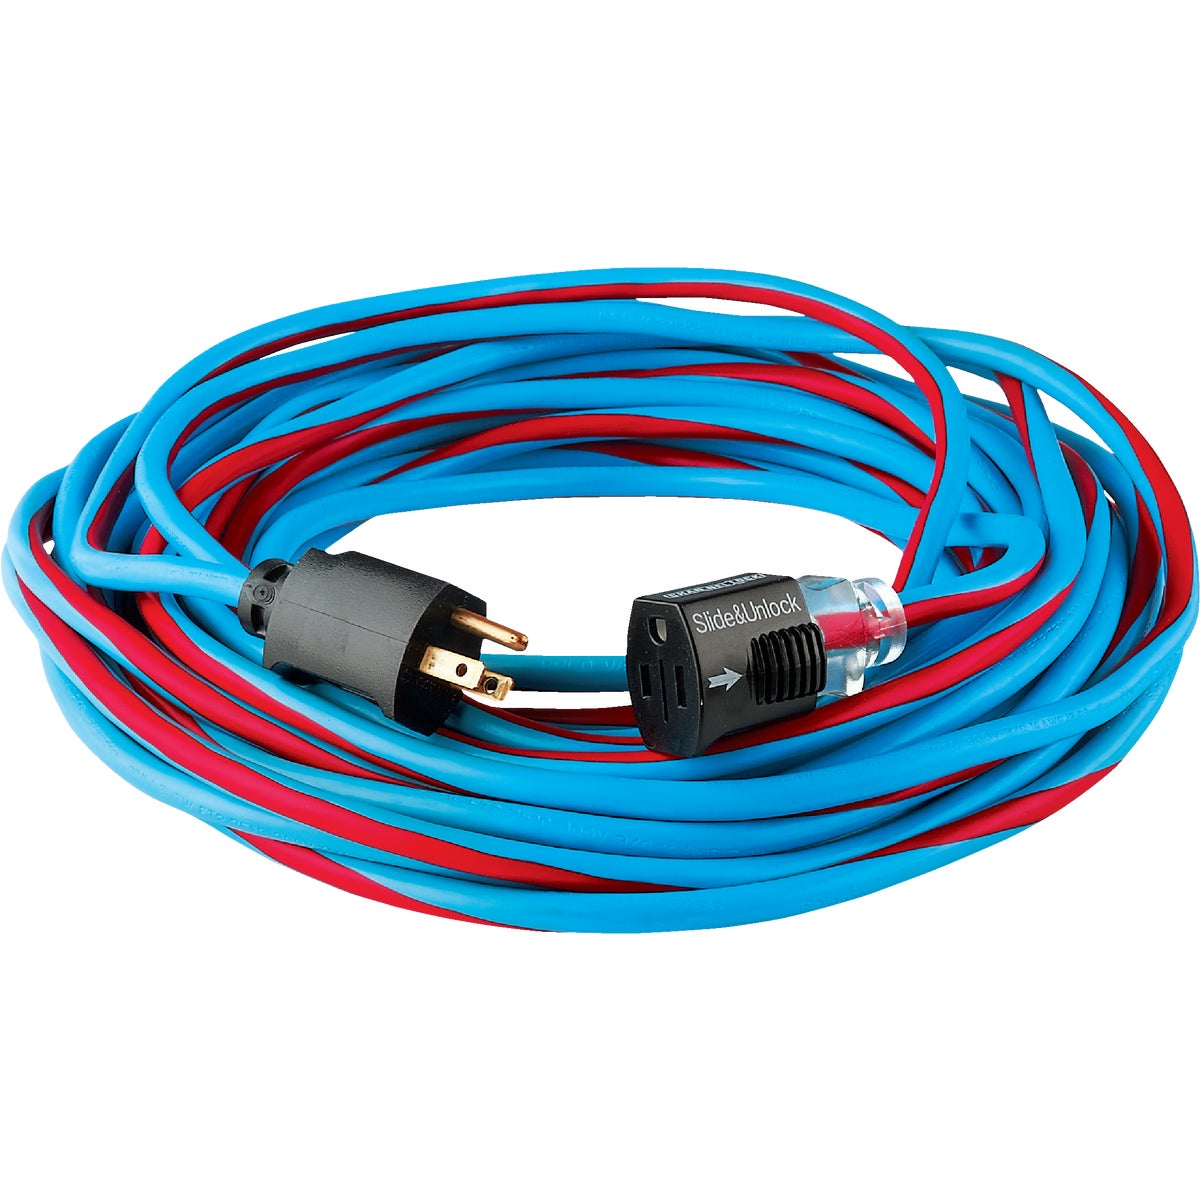 Channellock 50 Ft. 12/3 Extension Cord